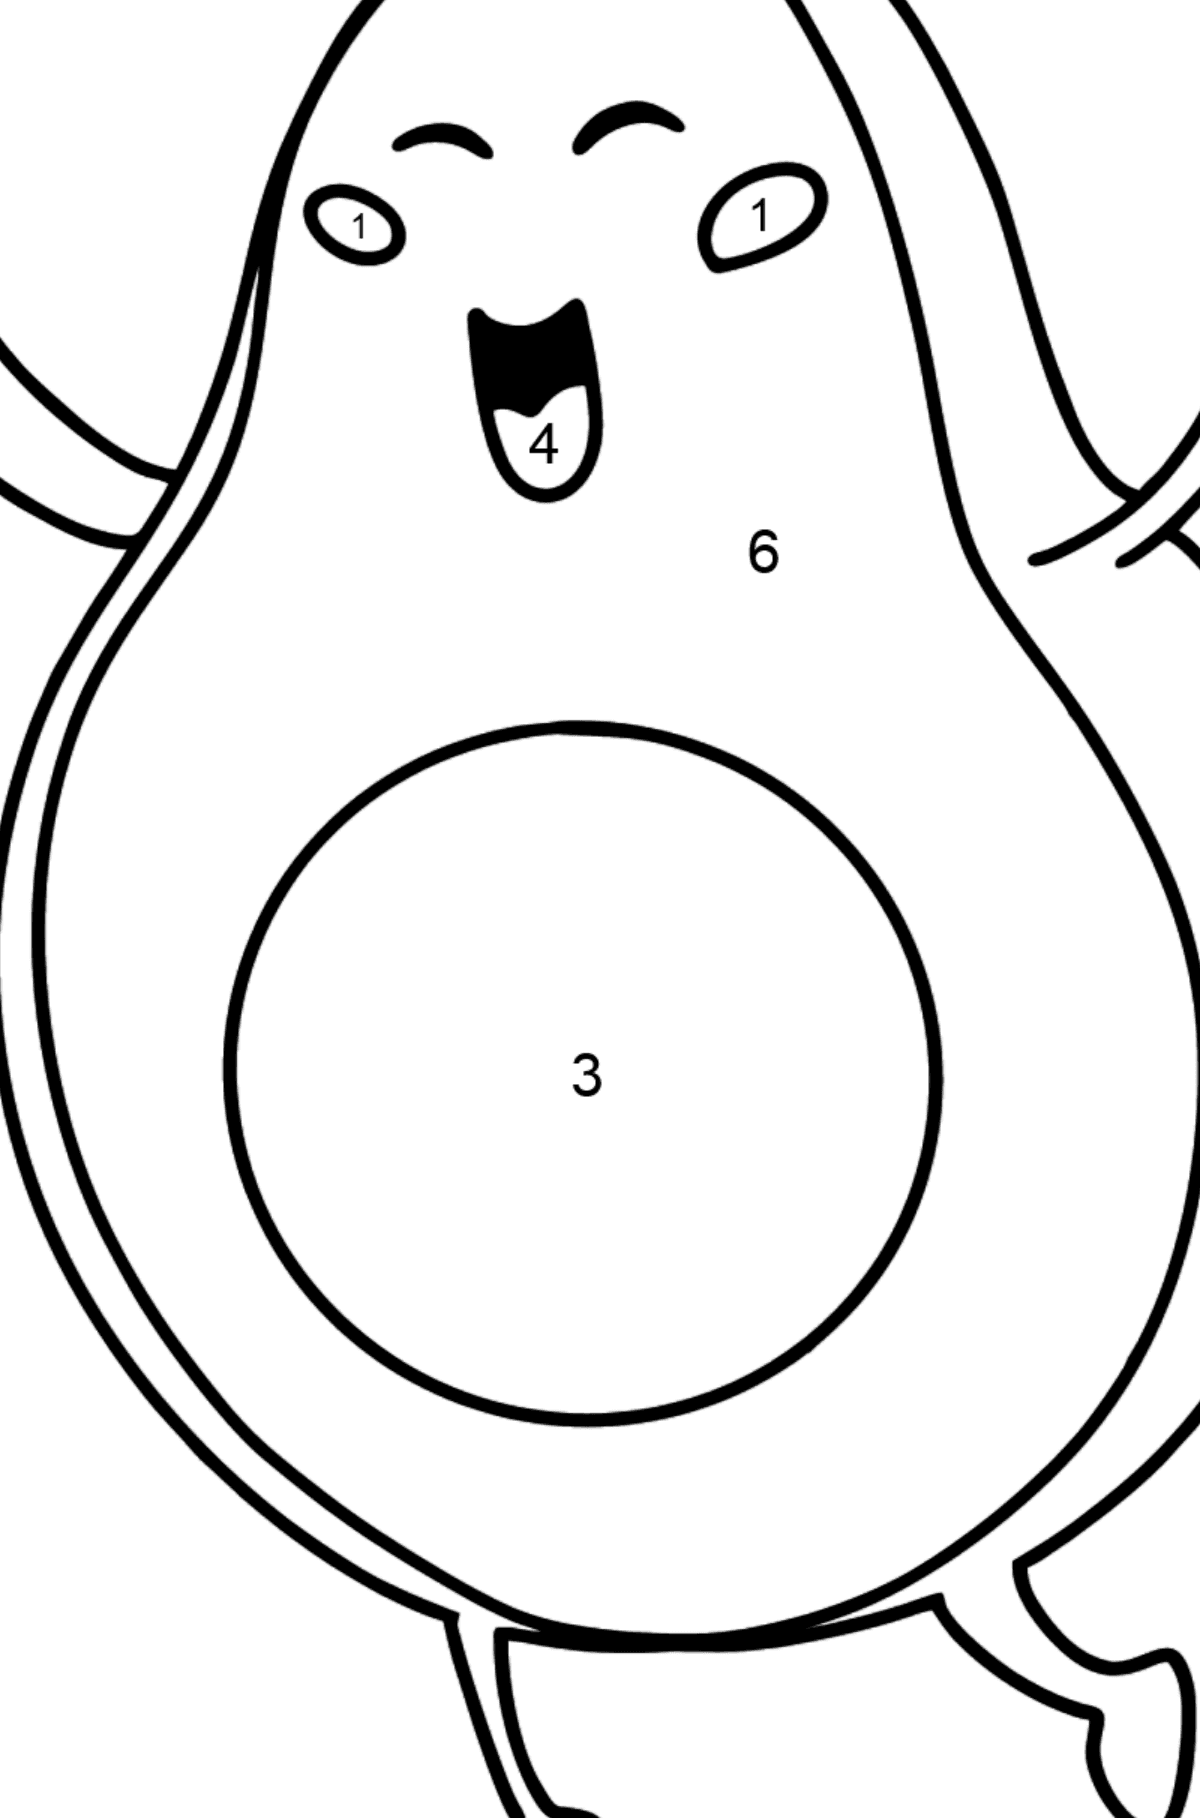 Avocado Hug coloring page - Coloring by Numbers for Kids